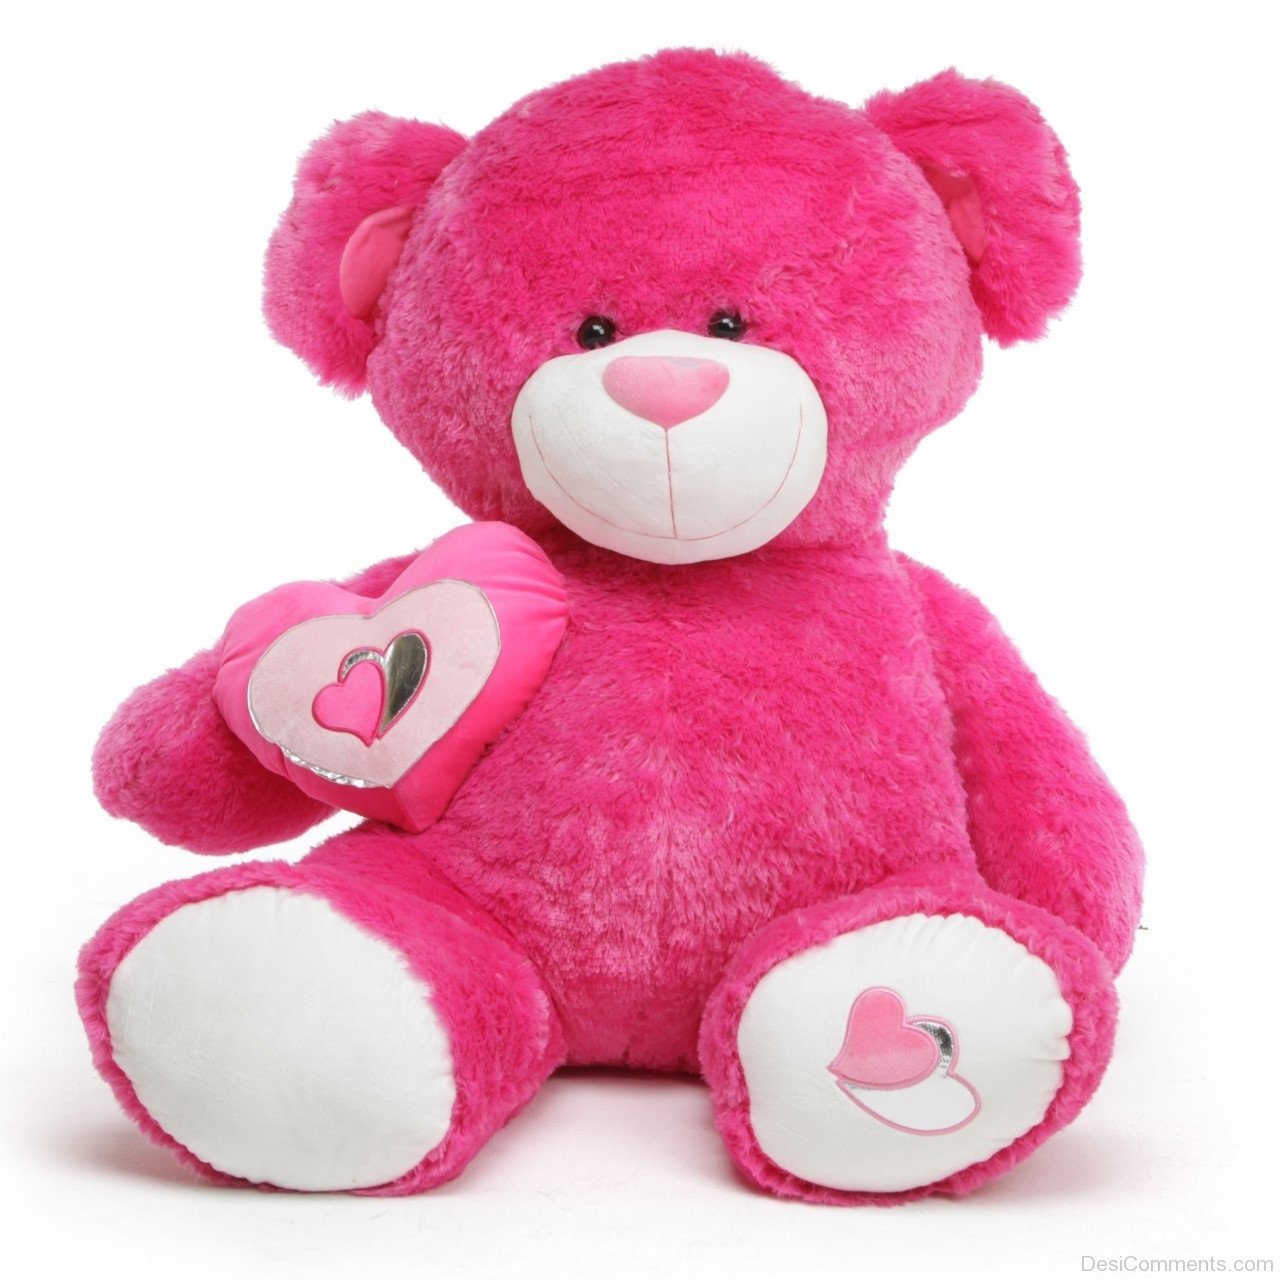 Pink Teddy Bear Image - DesiComments.com